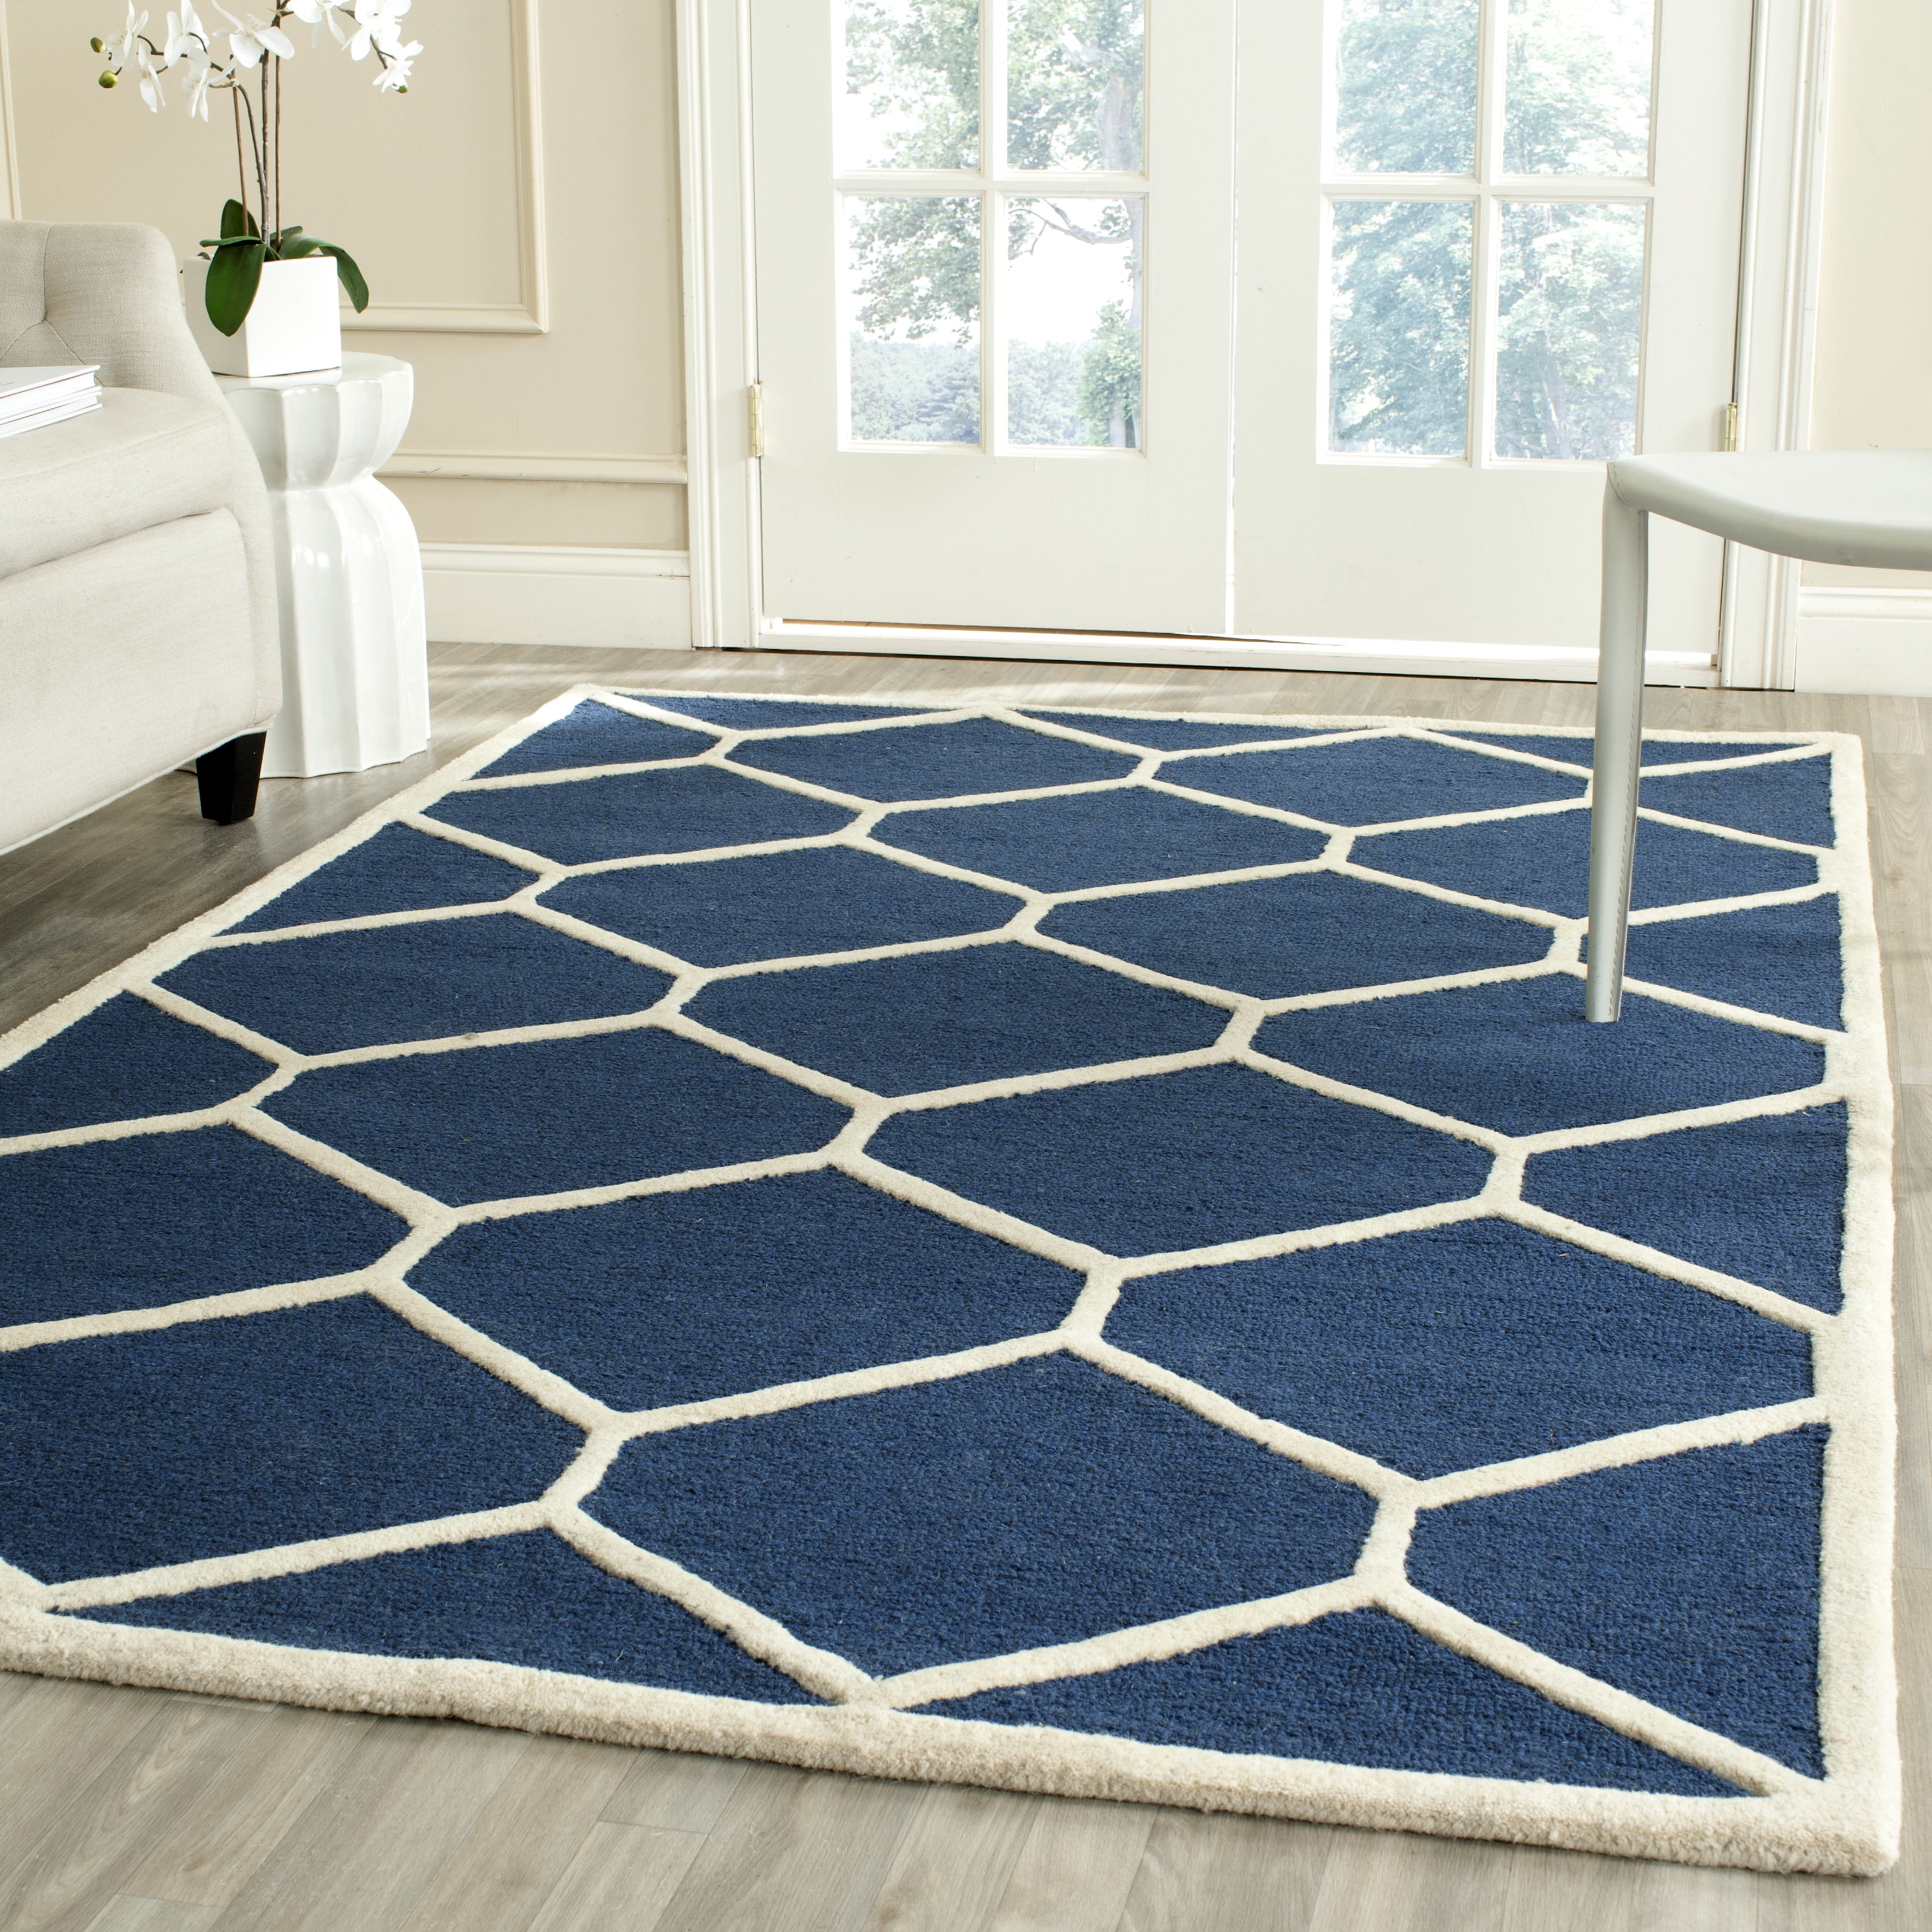 Area Rug Navy Blue Ivory 9, Blue Wool Area Rugs 9 X 12